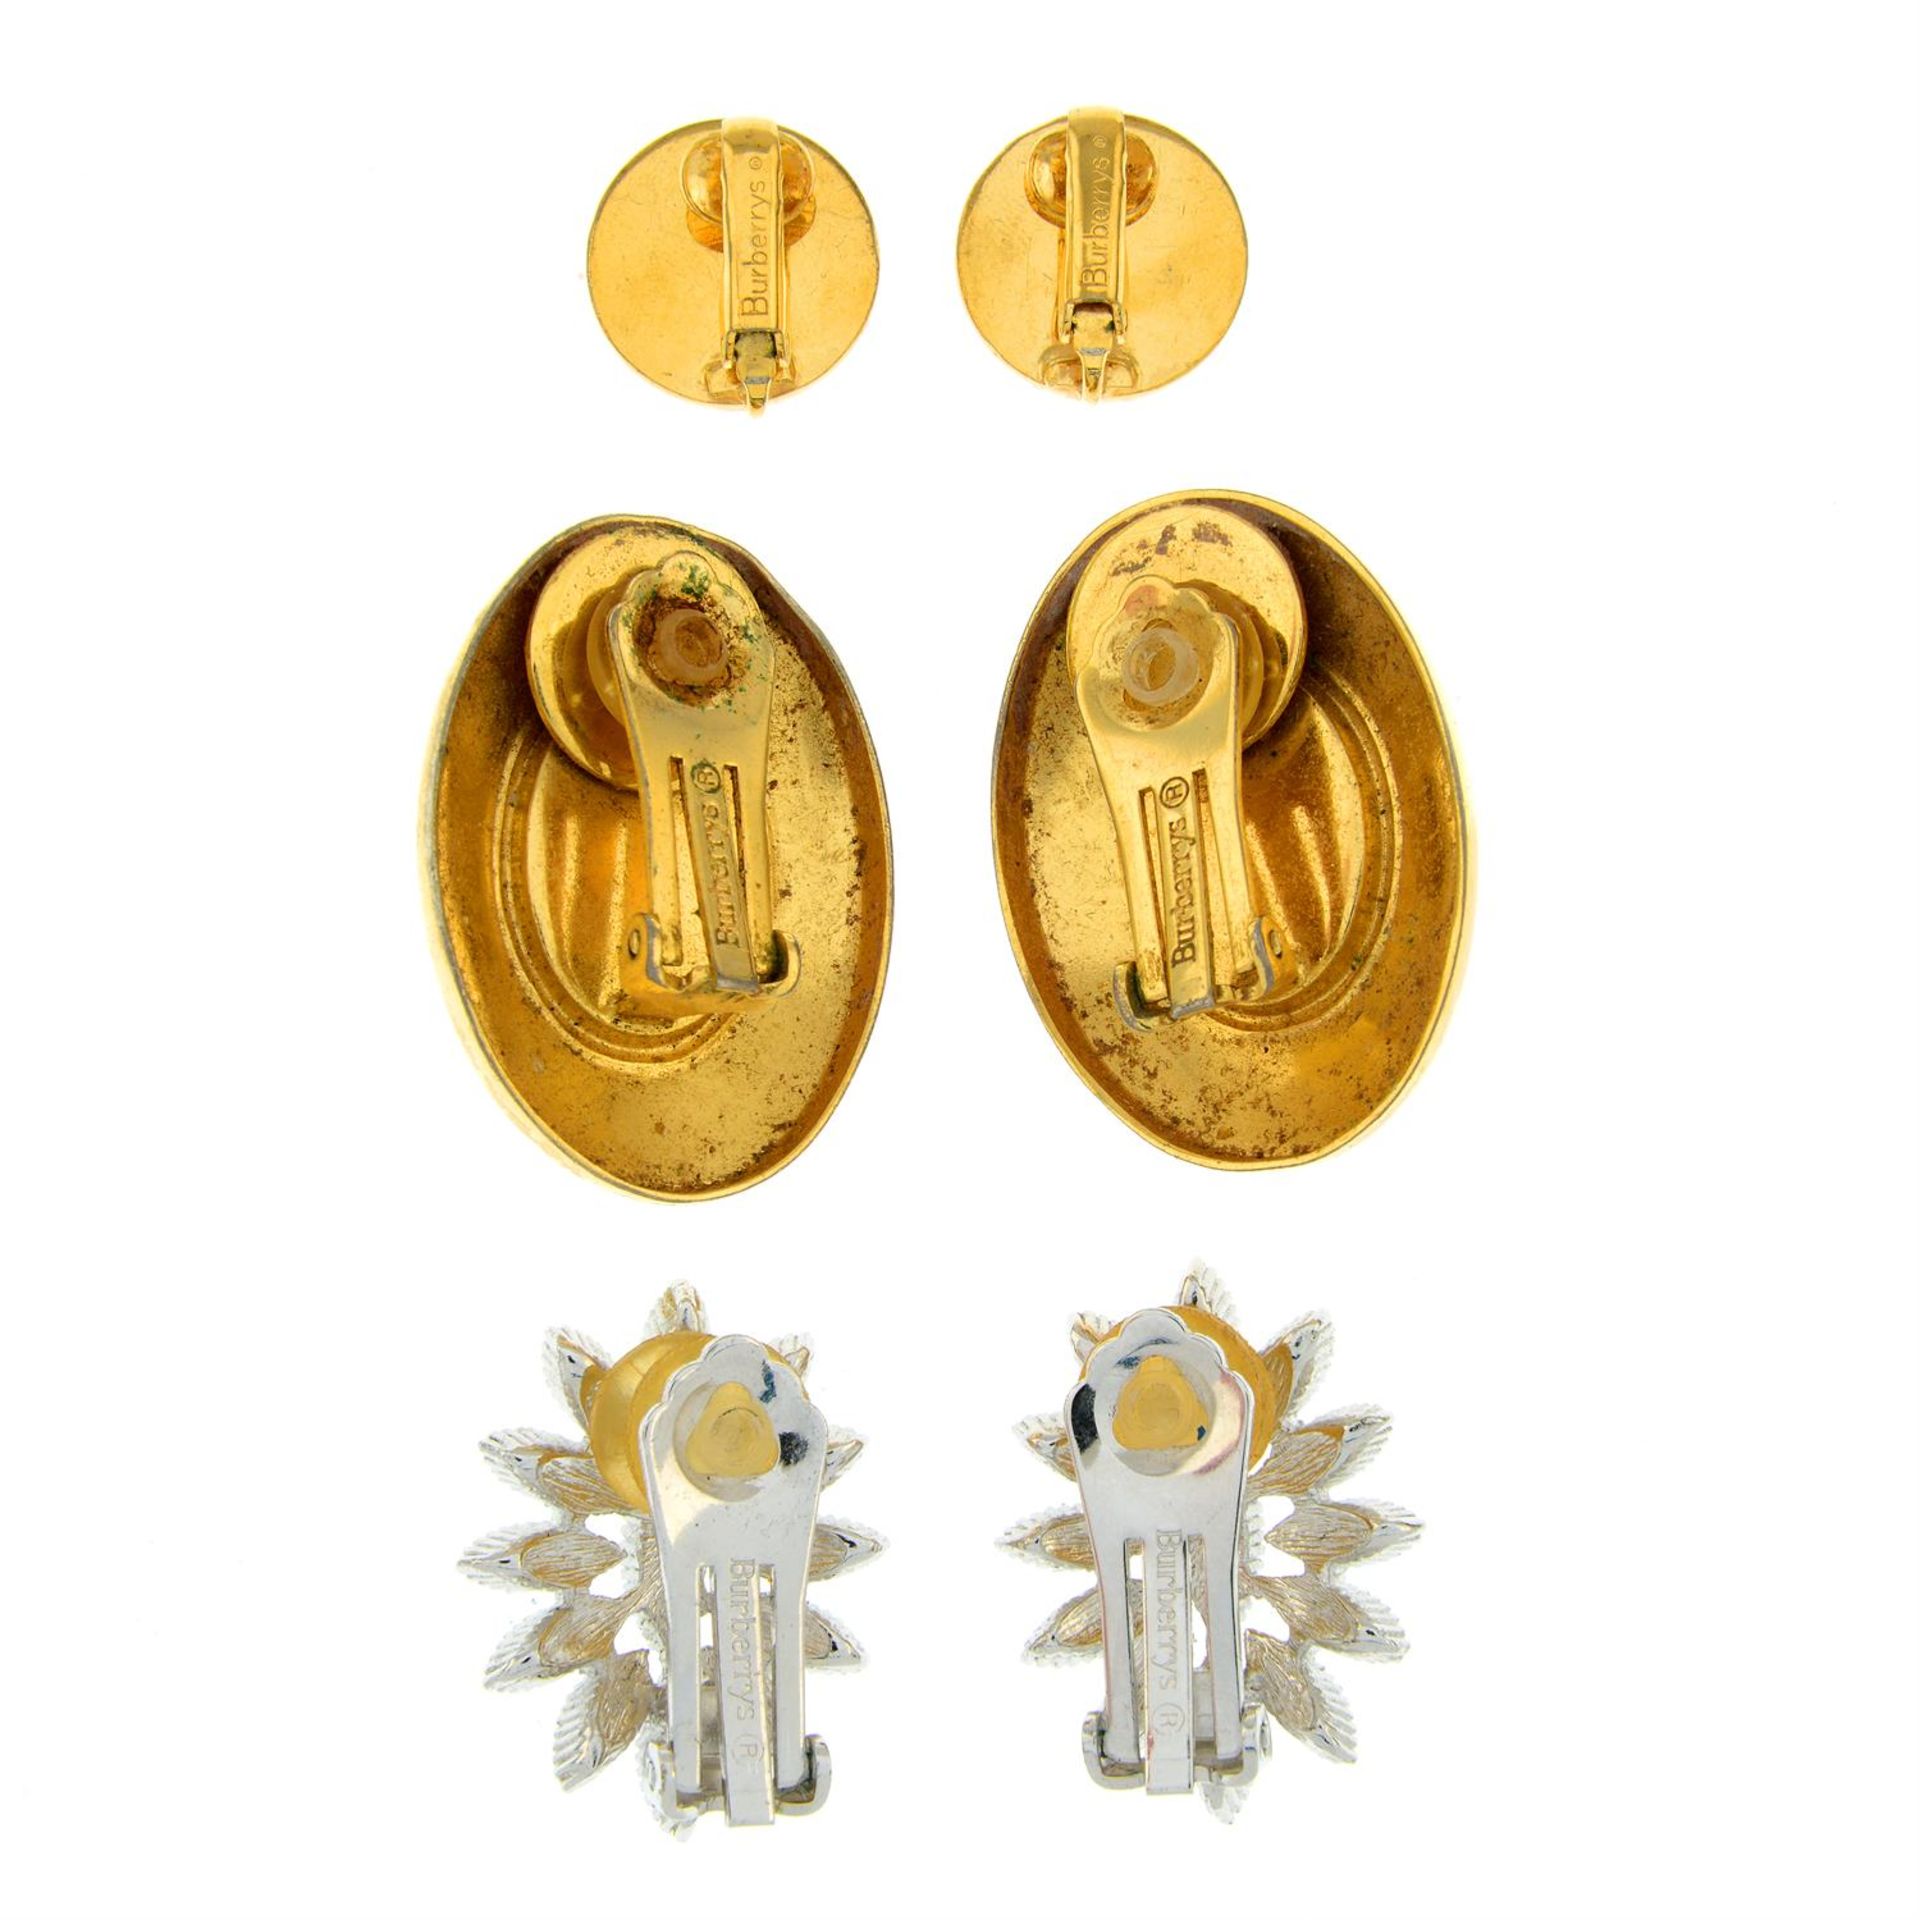 BURBERRY - three pairs of clip-on earrings. - Image 2 of 2